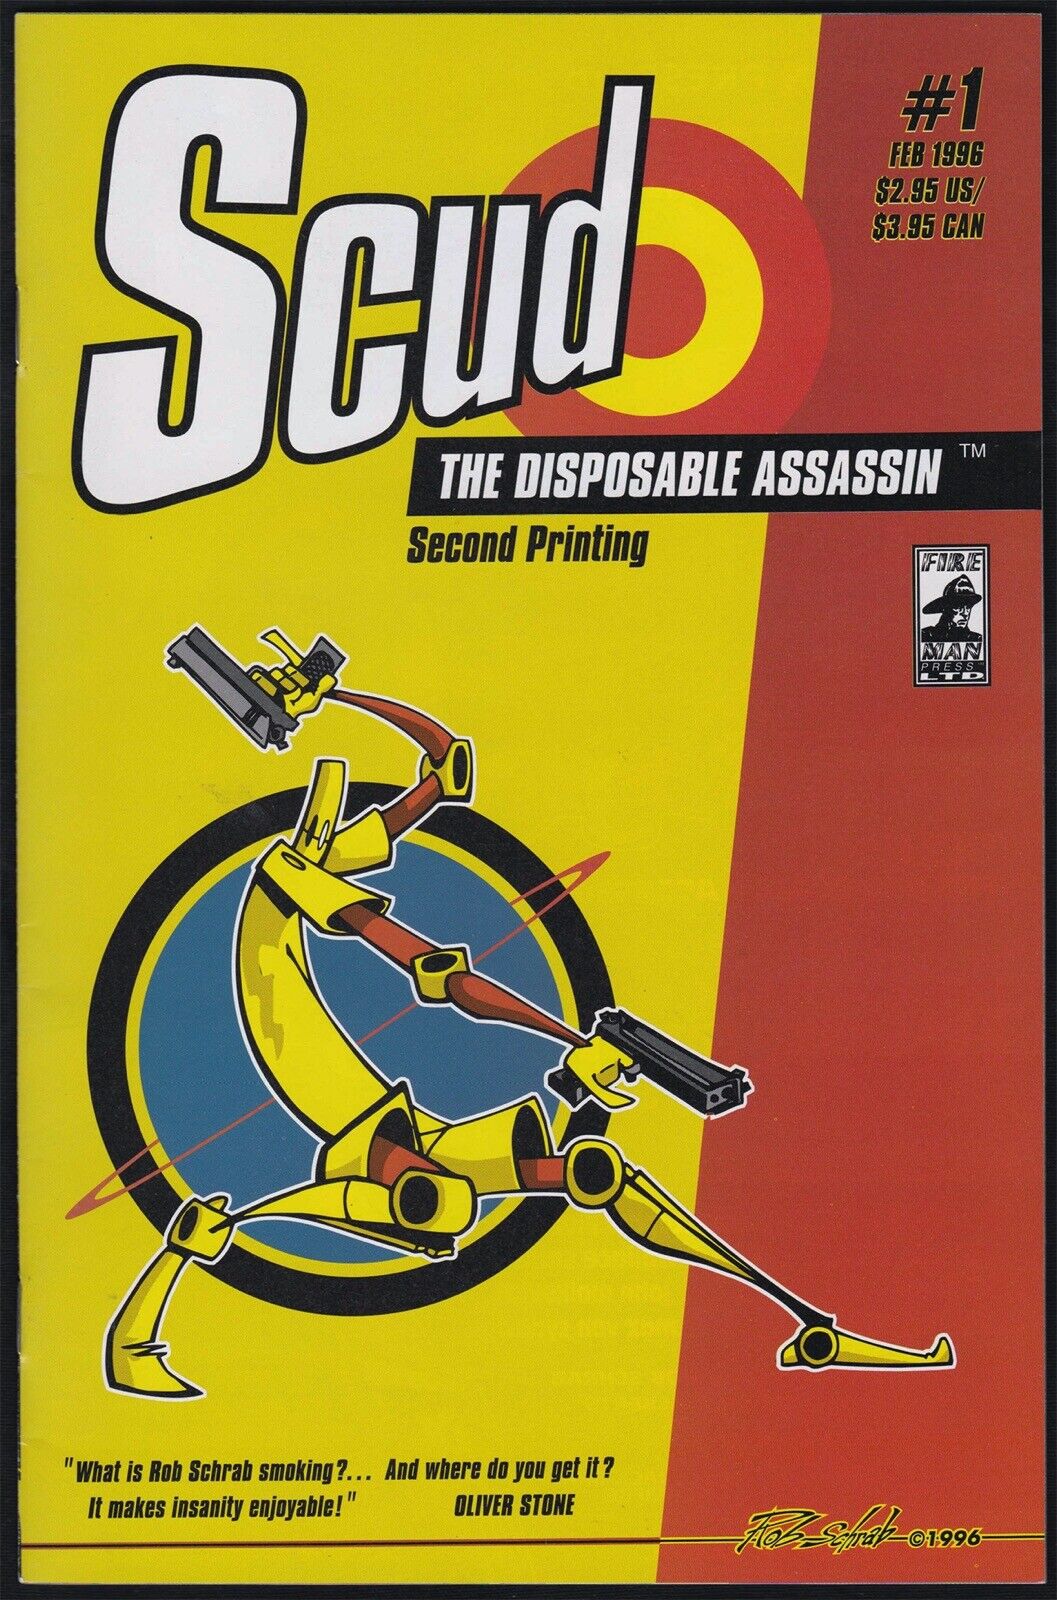 Fireman Press SCUD: THE DISPOSABLE ASSASSIN #1 Second Printing VF/NM